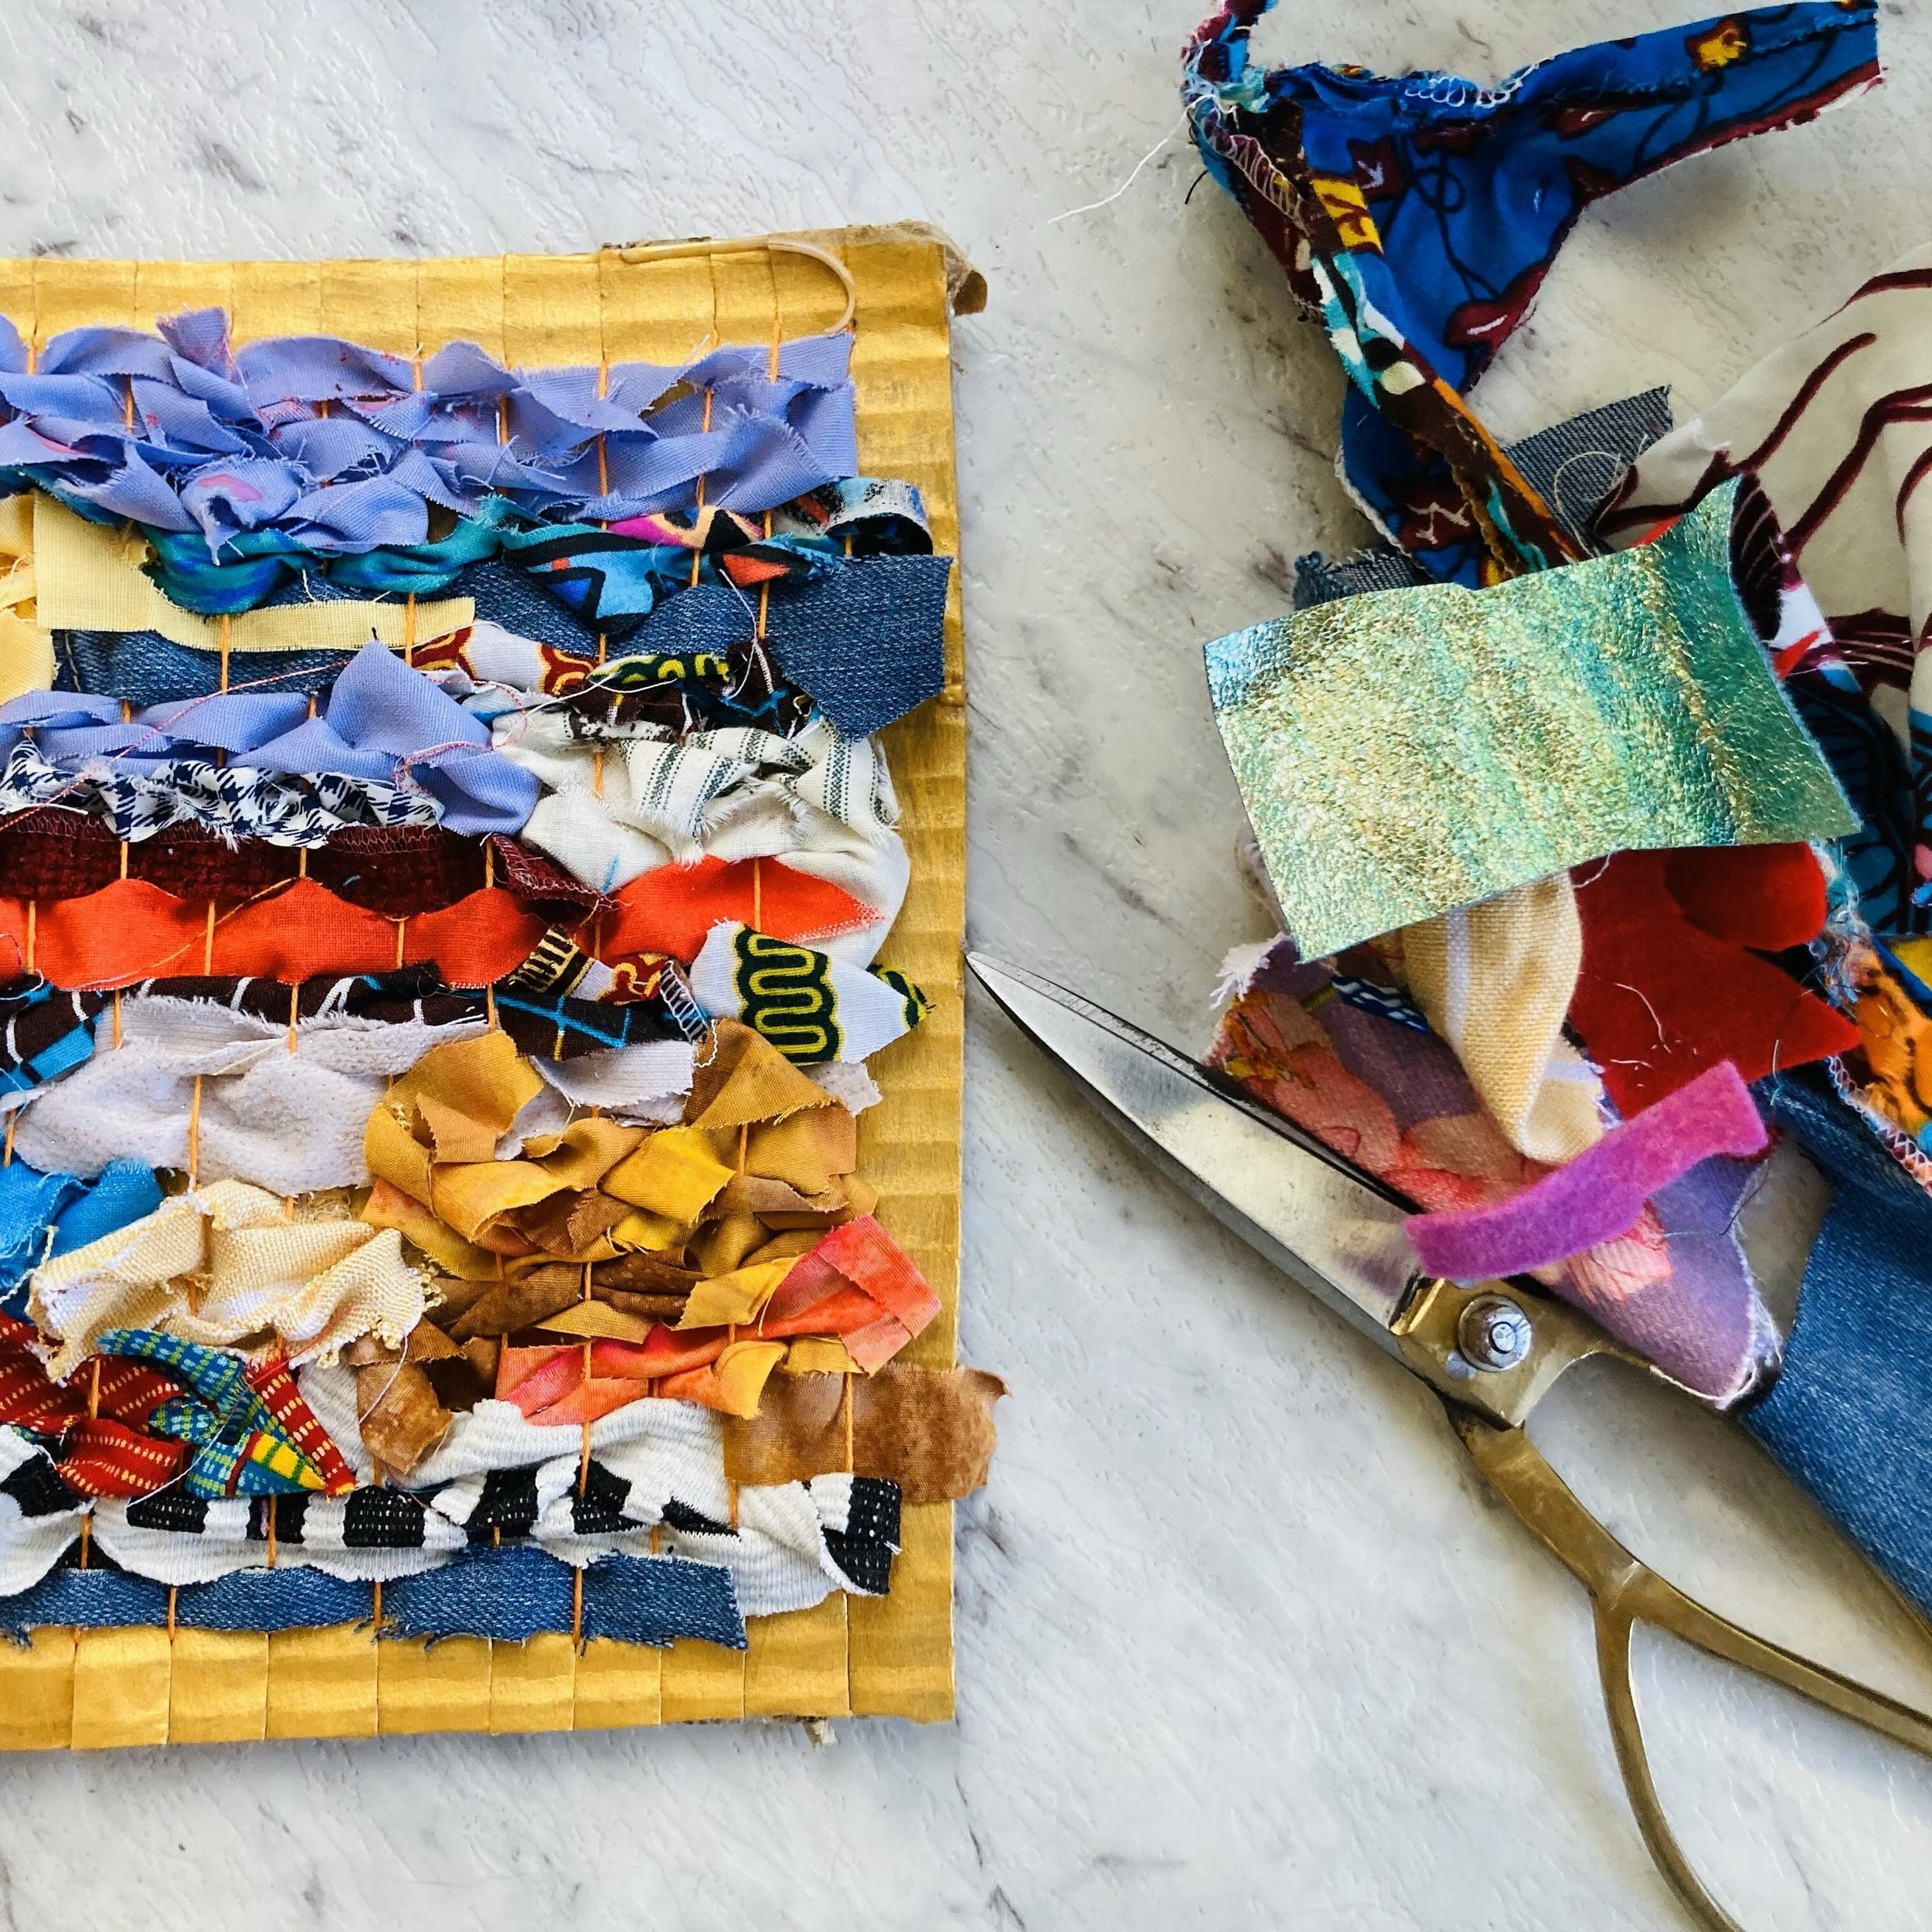 ✂️ Join me for Scrap Fabric Weaving workshop and learn how to transform scraps of materials into delightful weavings.

Enjoy crafting sustainable and expressive art pieces that are eco-friendly!
 
Learn the basics of creating your own recycled cardbo